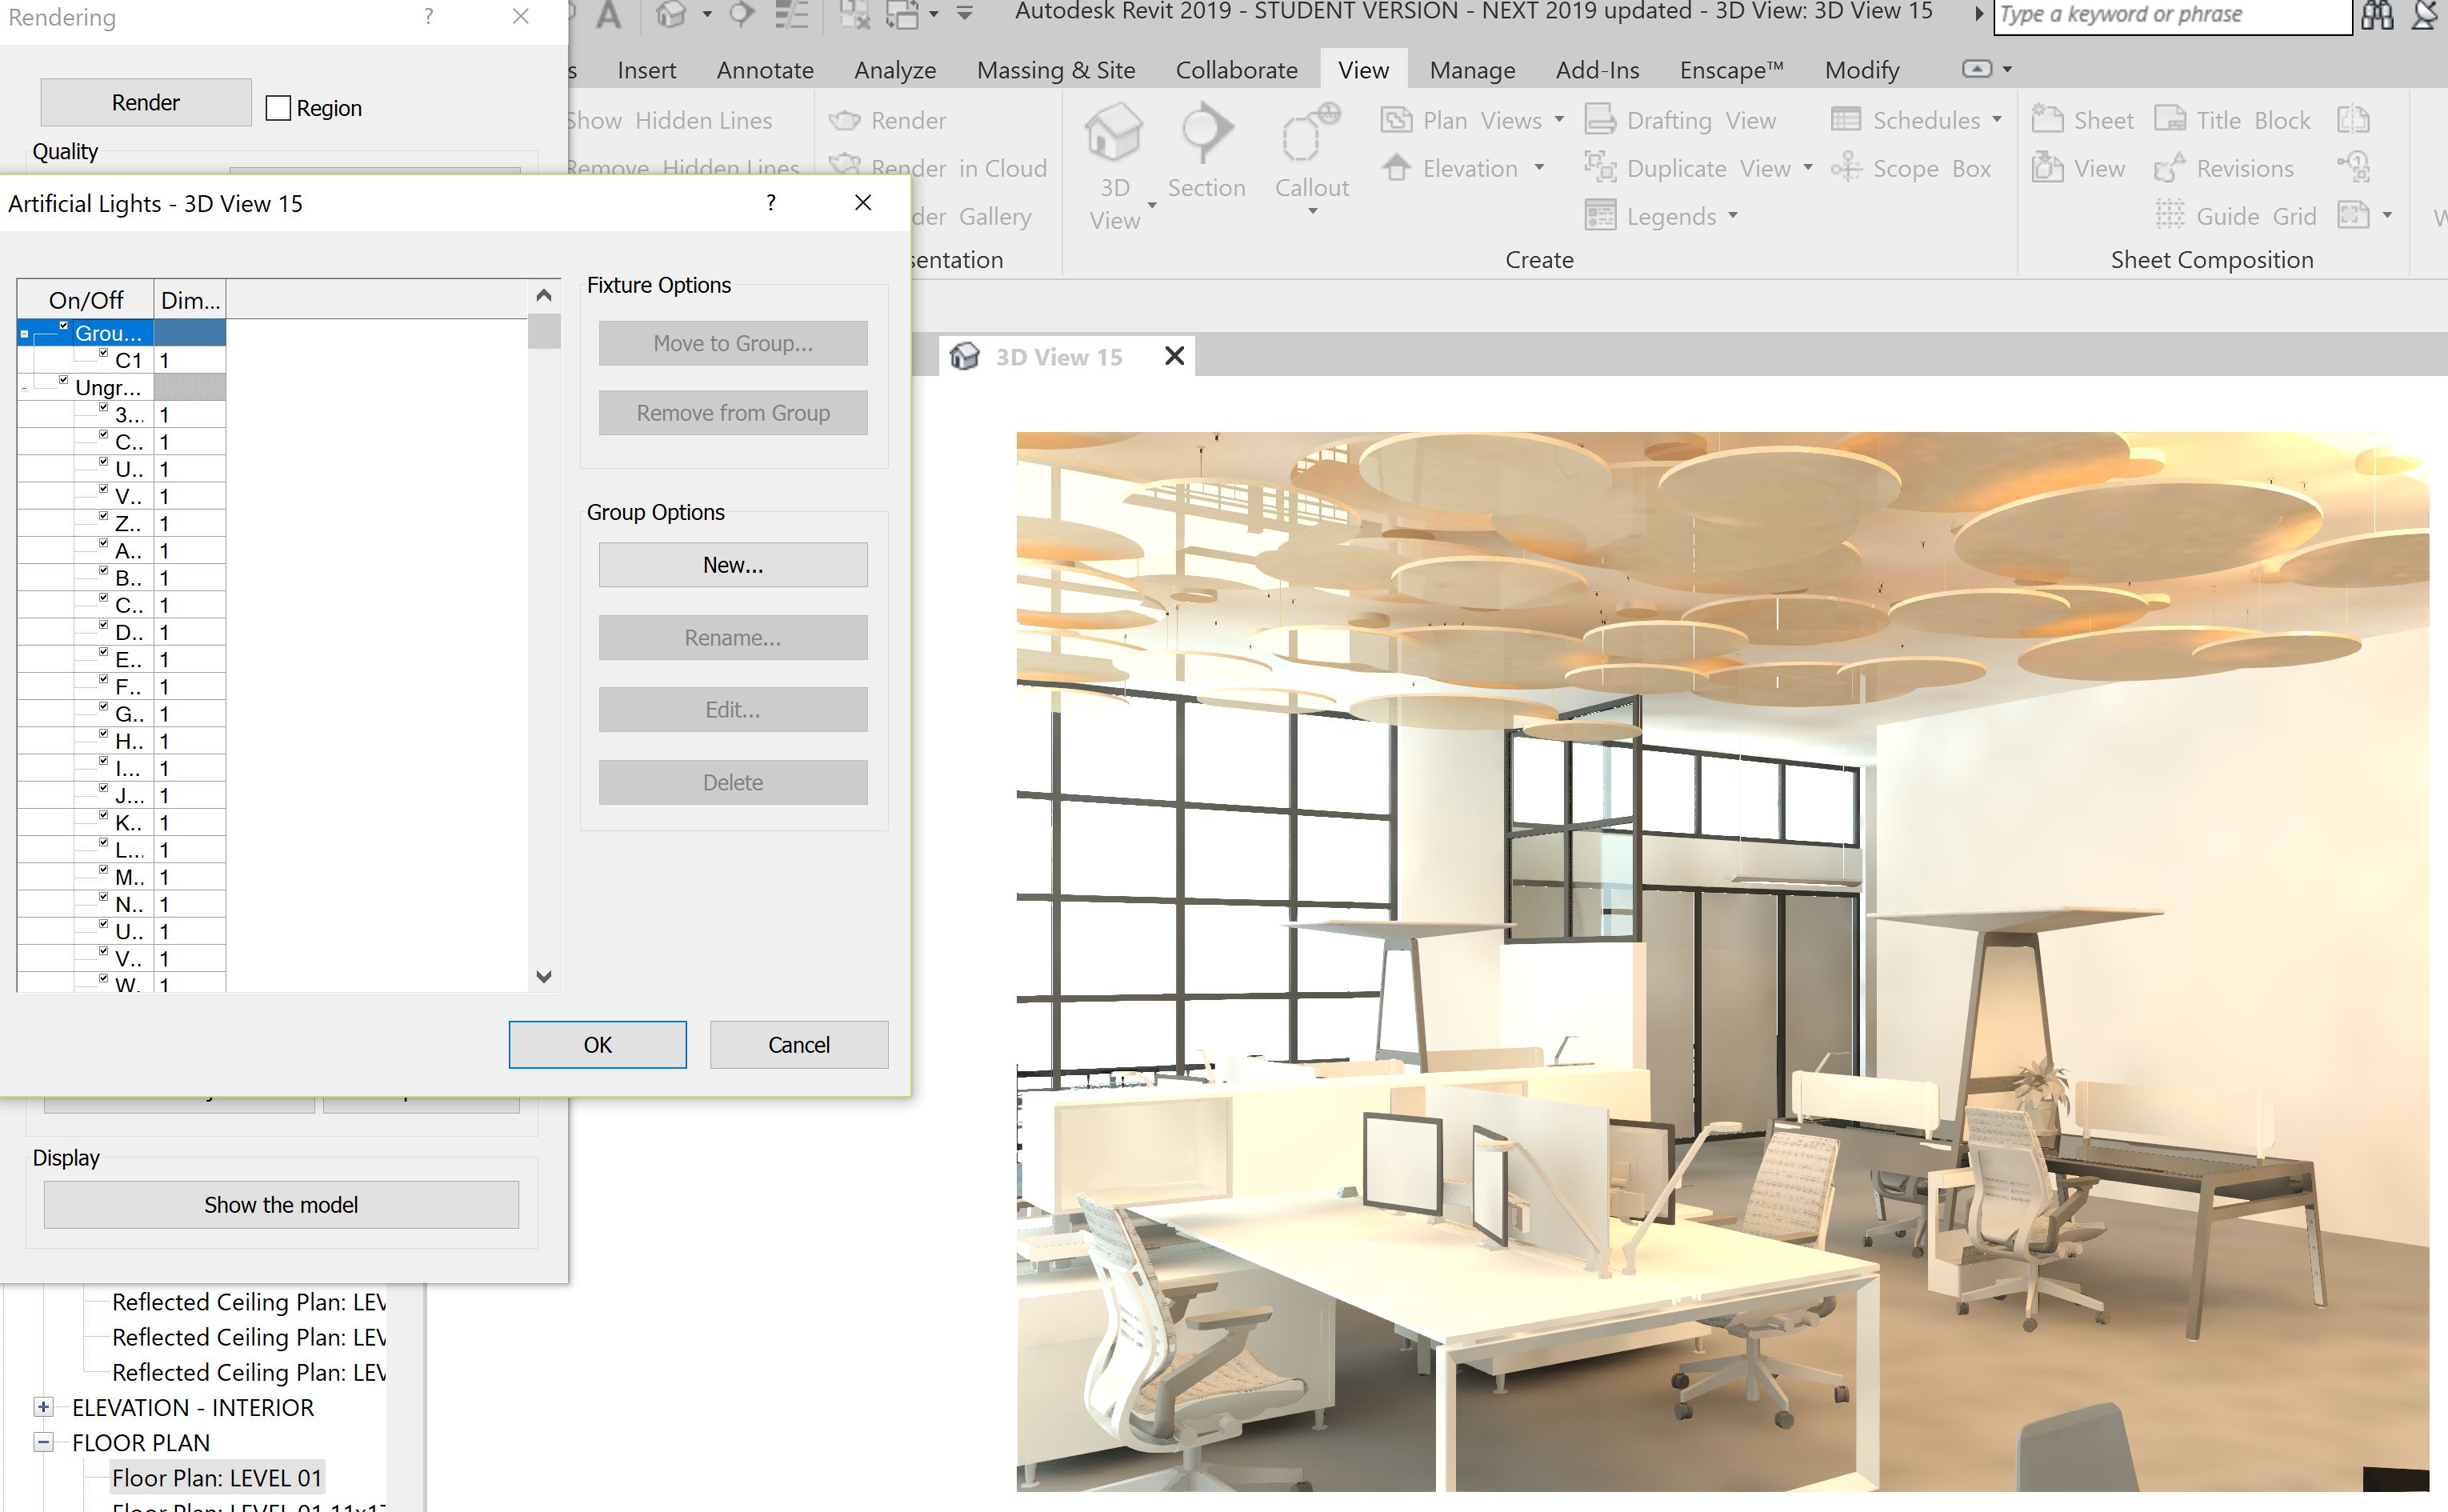 Lighting not turning on Rendering - Autodesk Community Products